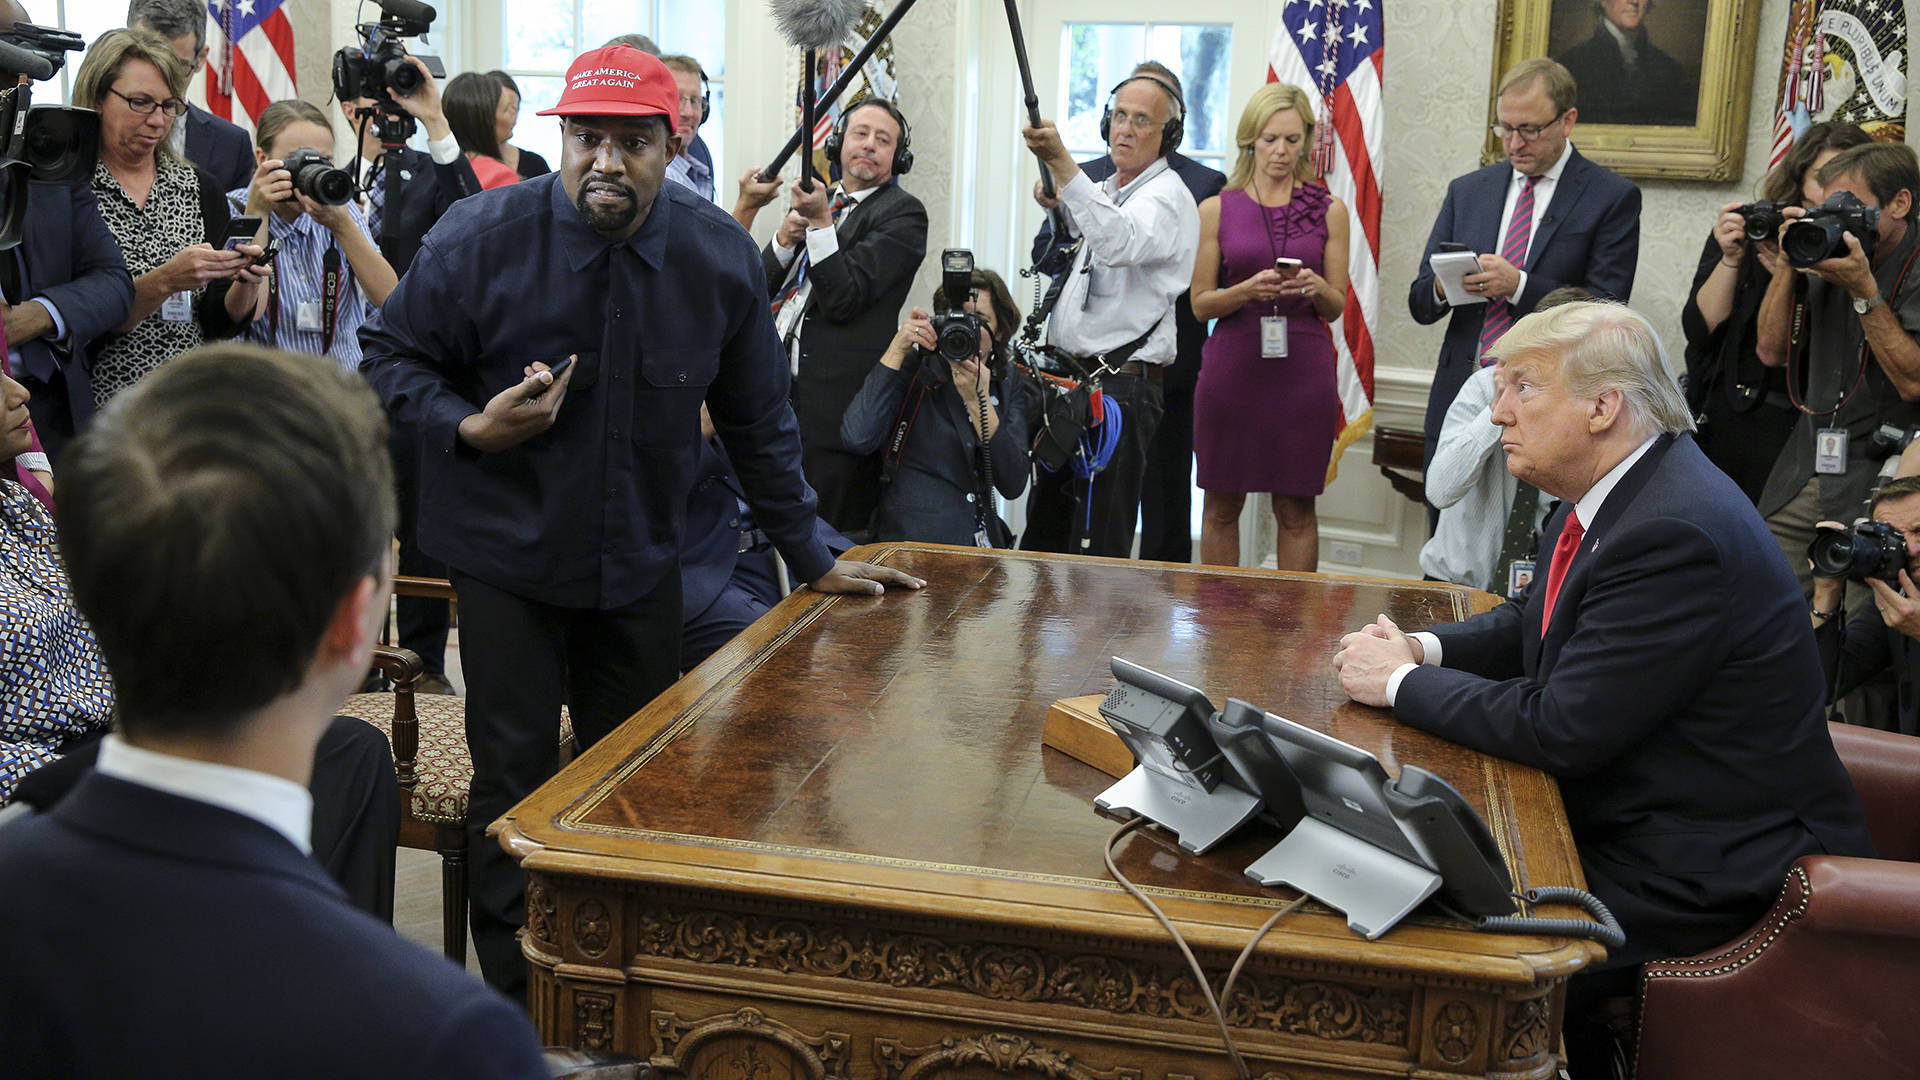 Kanye West stands up as he speaks during a meeting with Donald Trump in the Oval office of the White House on October 11, 2018 in Washington, DC.  Oliver Contreras - Pool/Getty Images